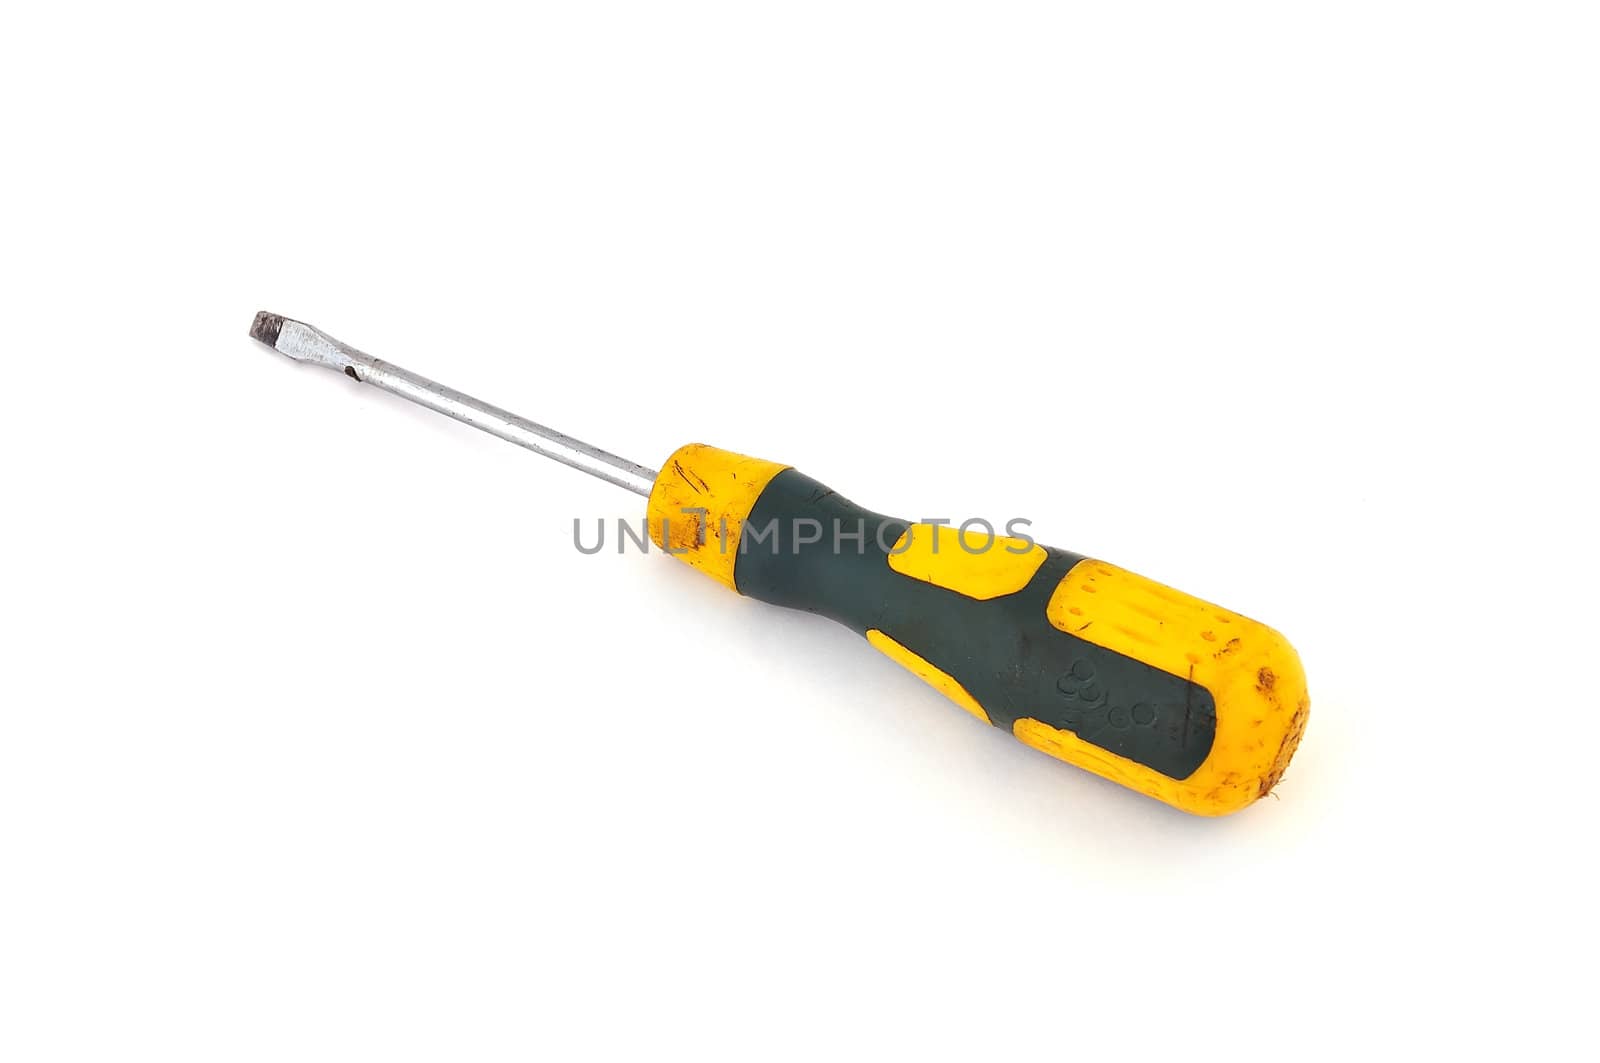  old screwdriver by vetkit